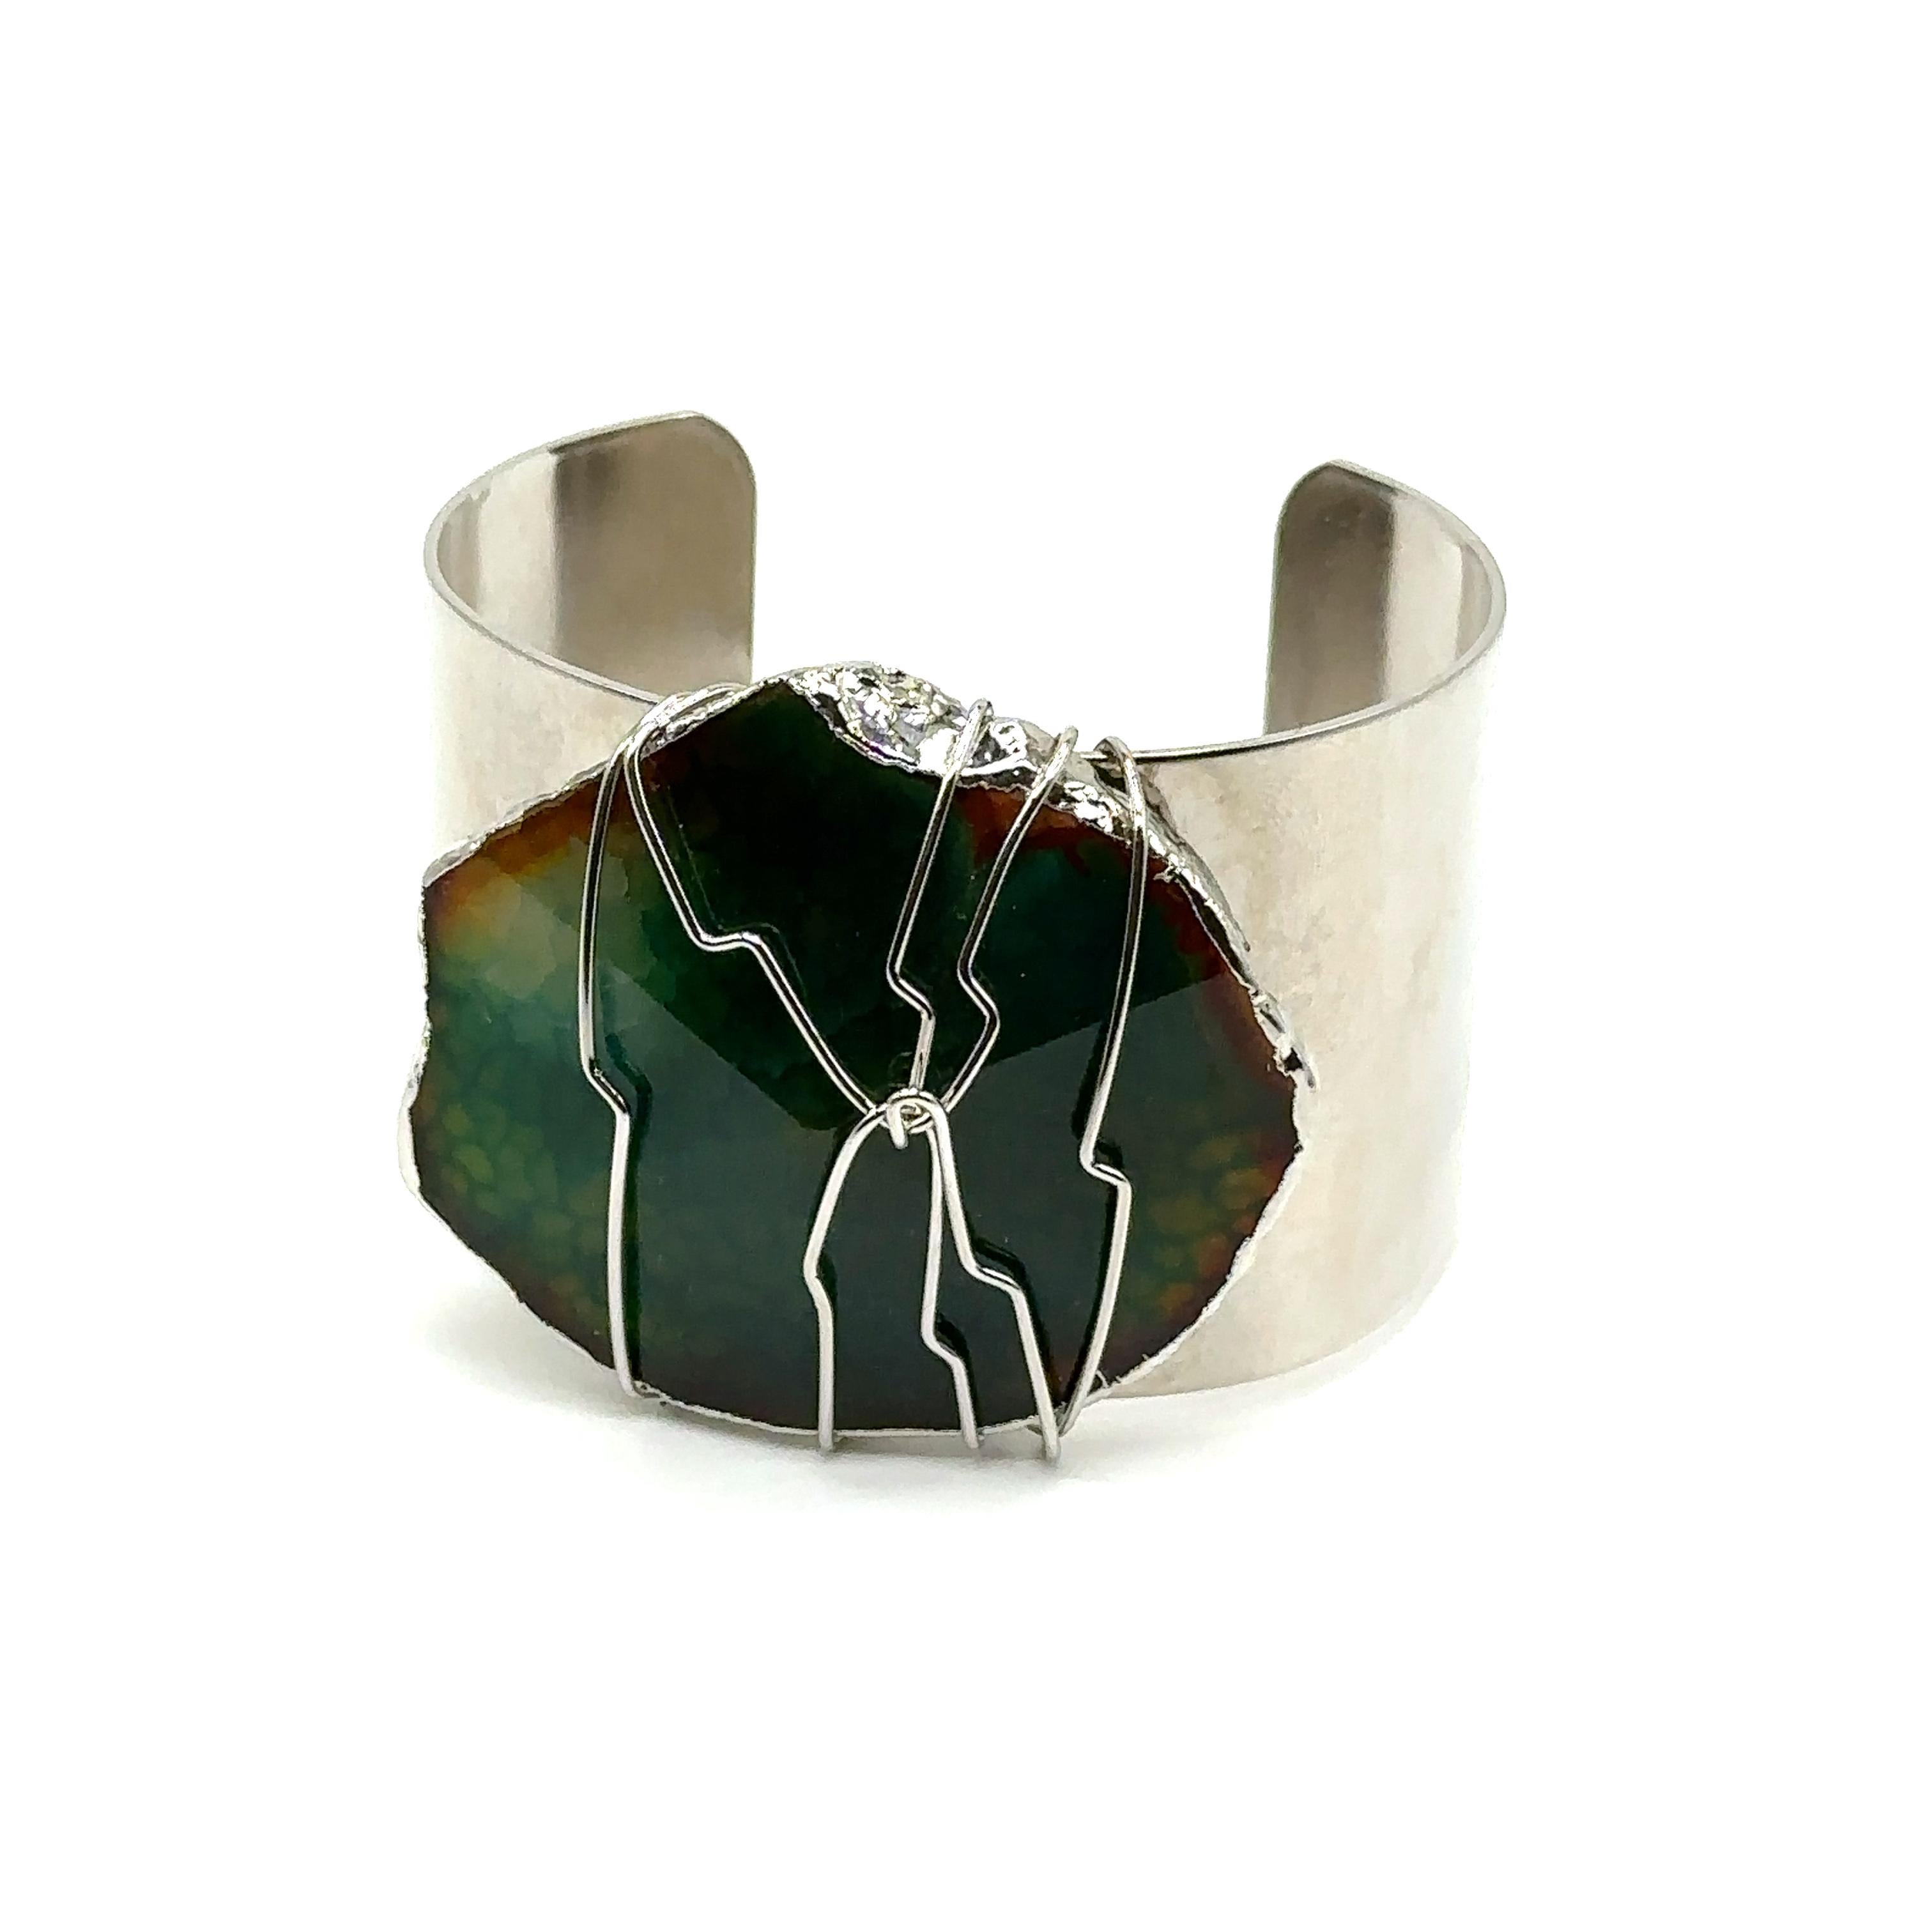 Bailey - Bracelet cuff white rhodium plated with green agate In New Condition For Sale In Forest Hills, NY